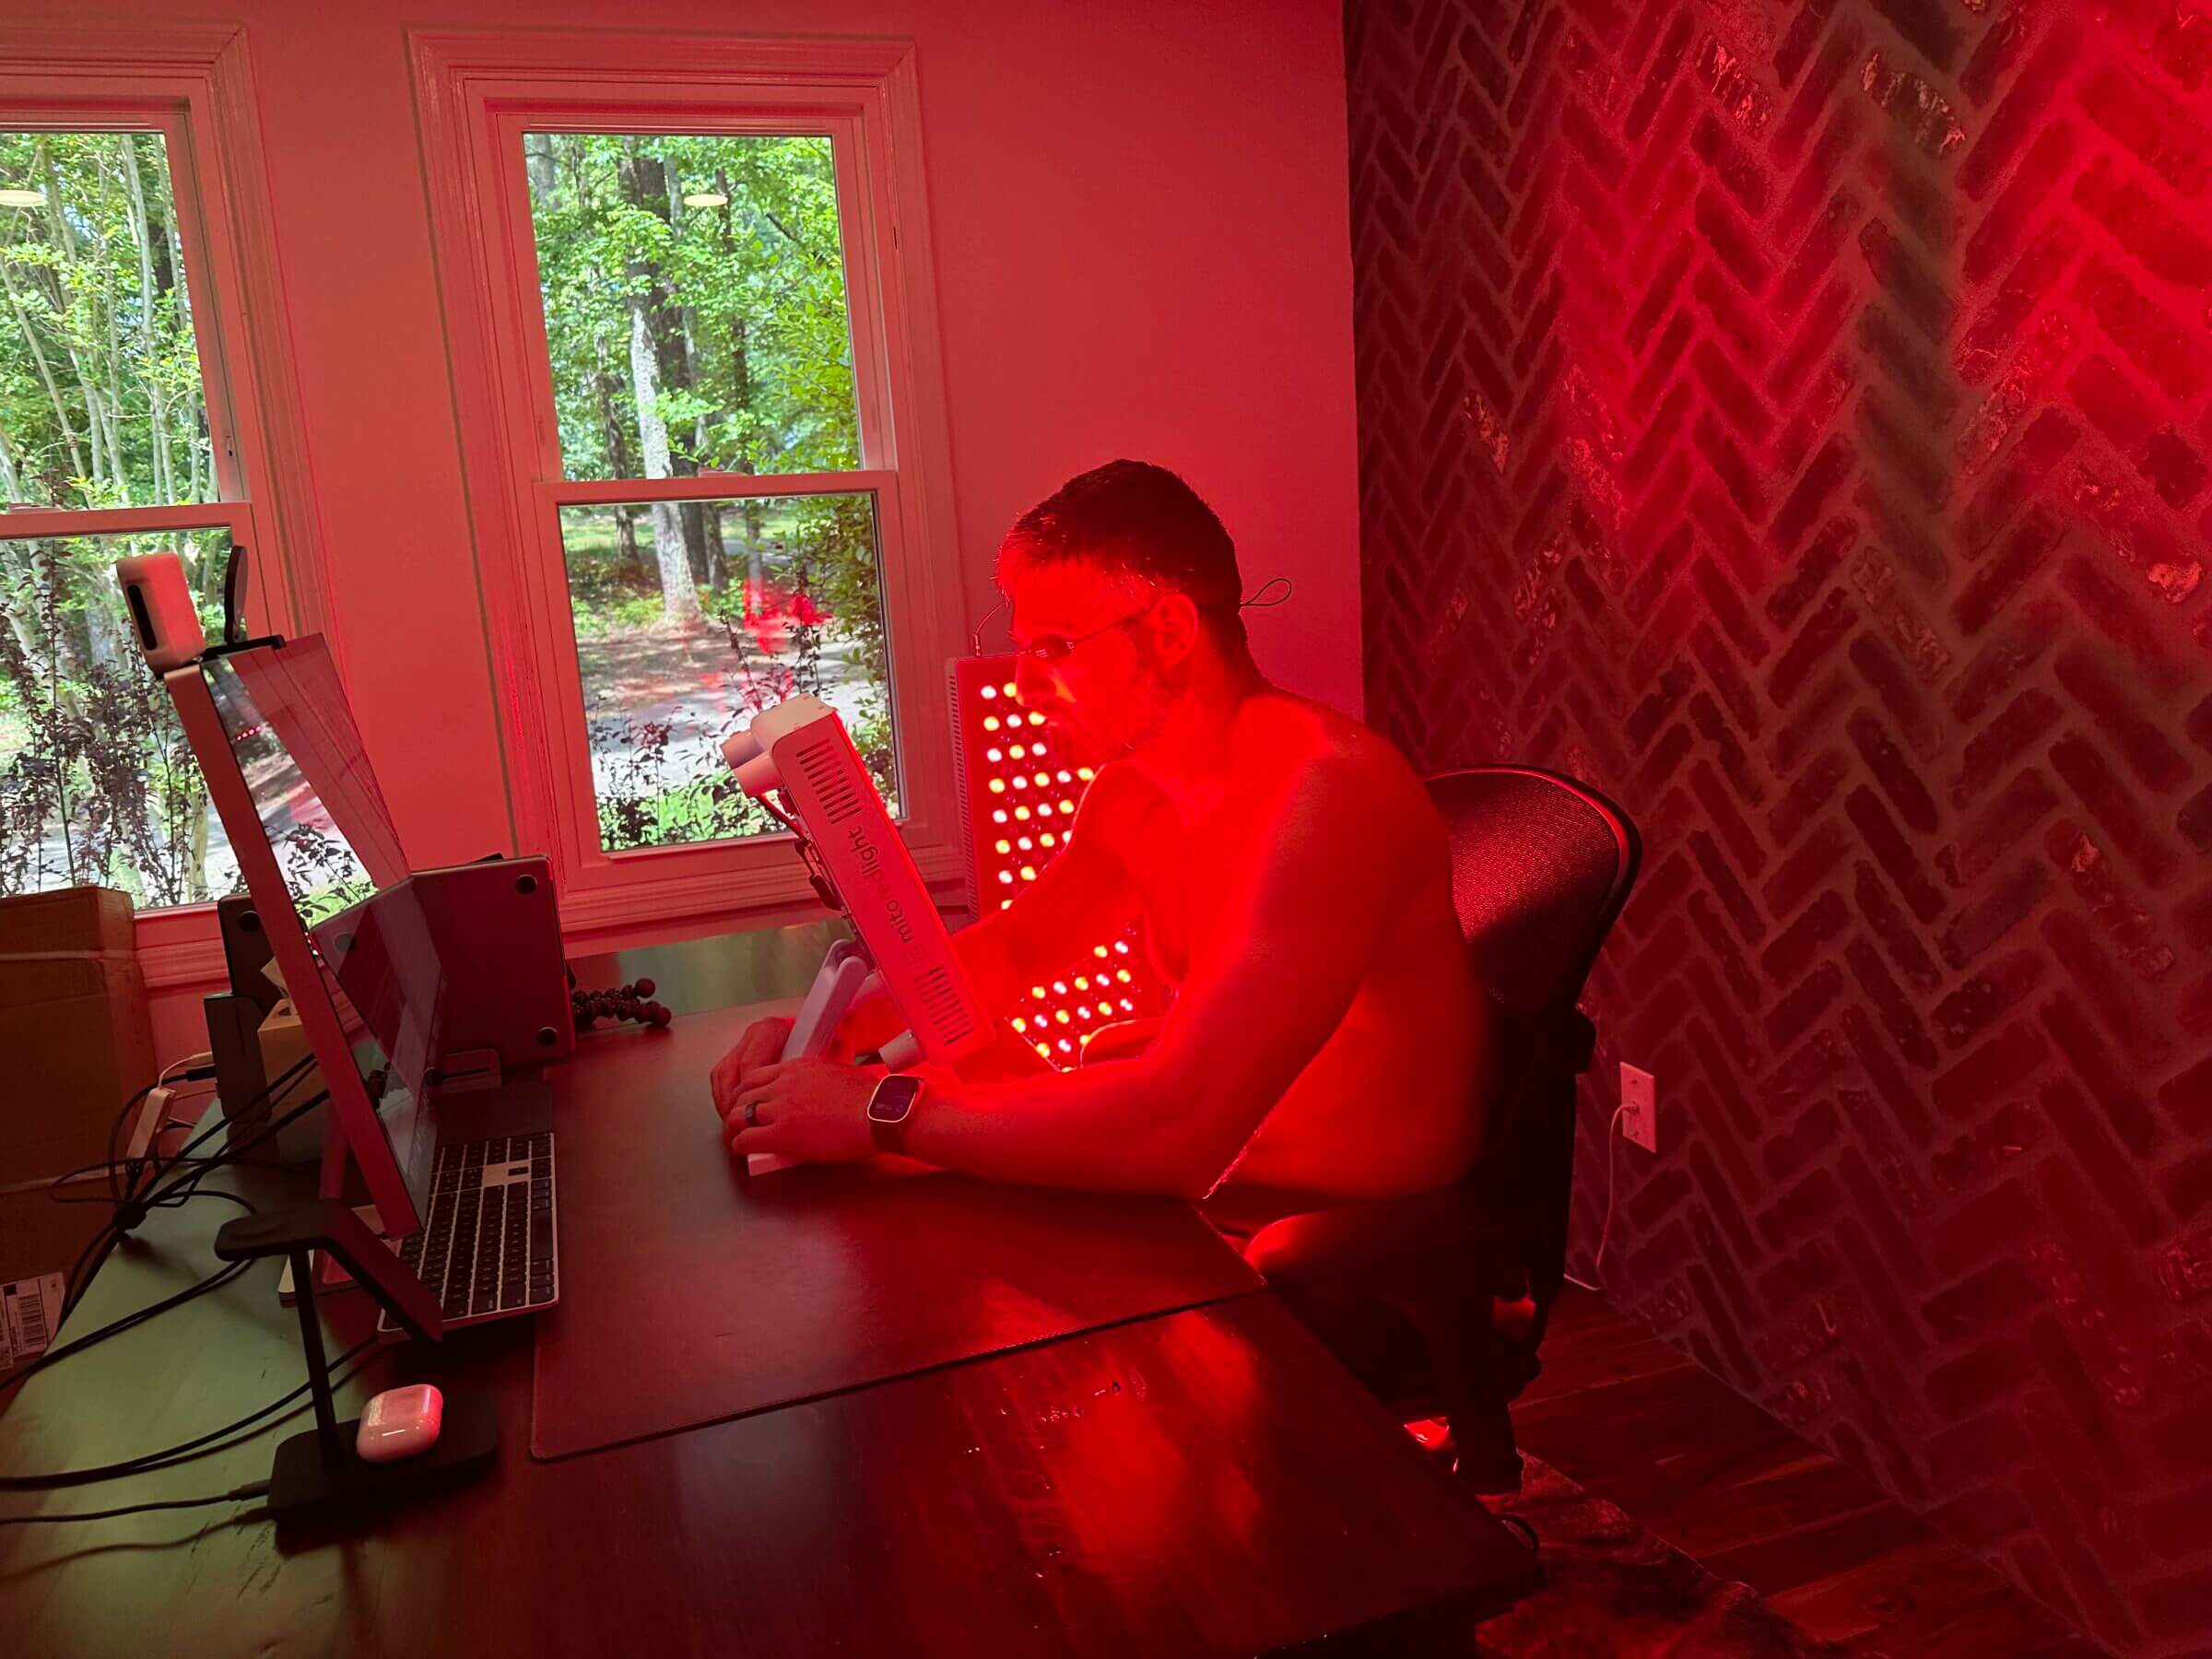 A picture of Michael sitting at his desk using a MItoPro 300 red light panel.